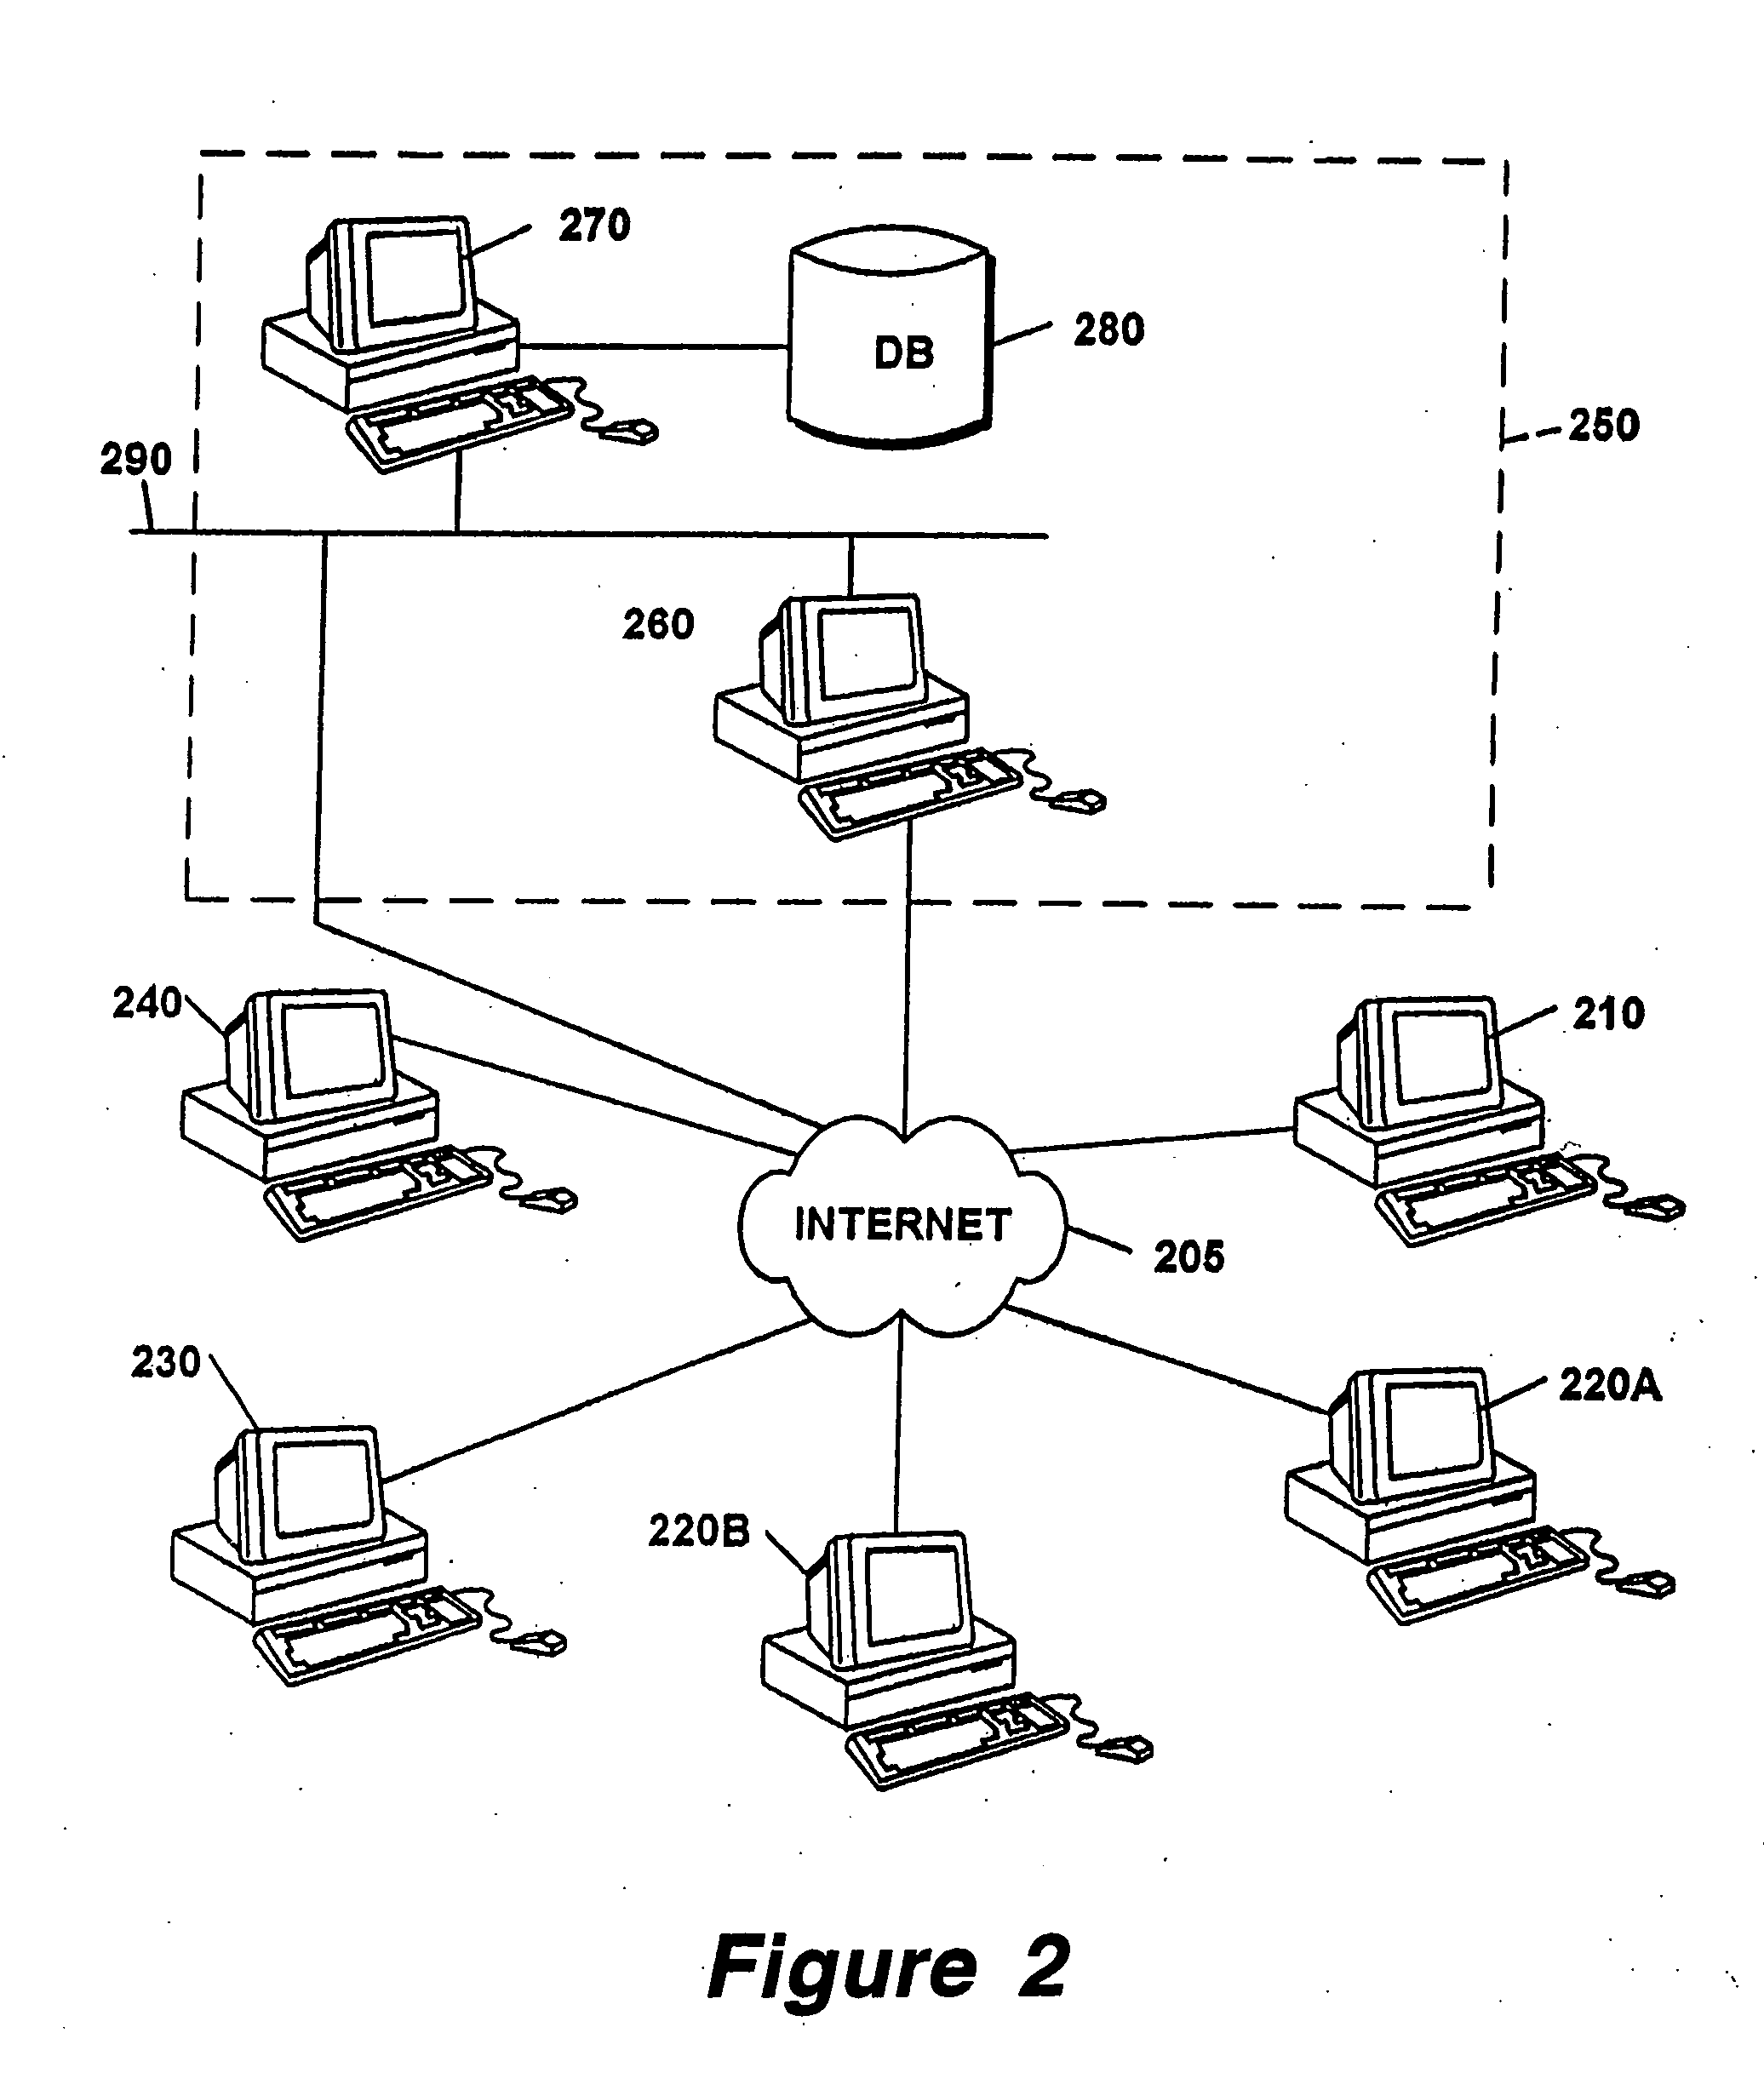 Method and apparatus for creating and conducting on-line charitable fund raising activities